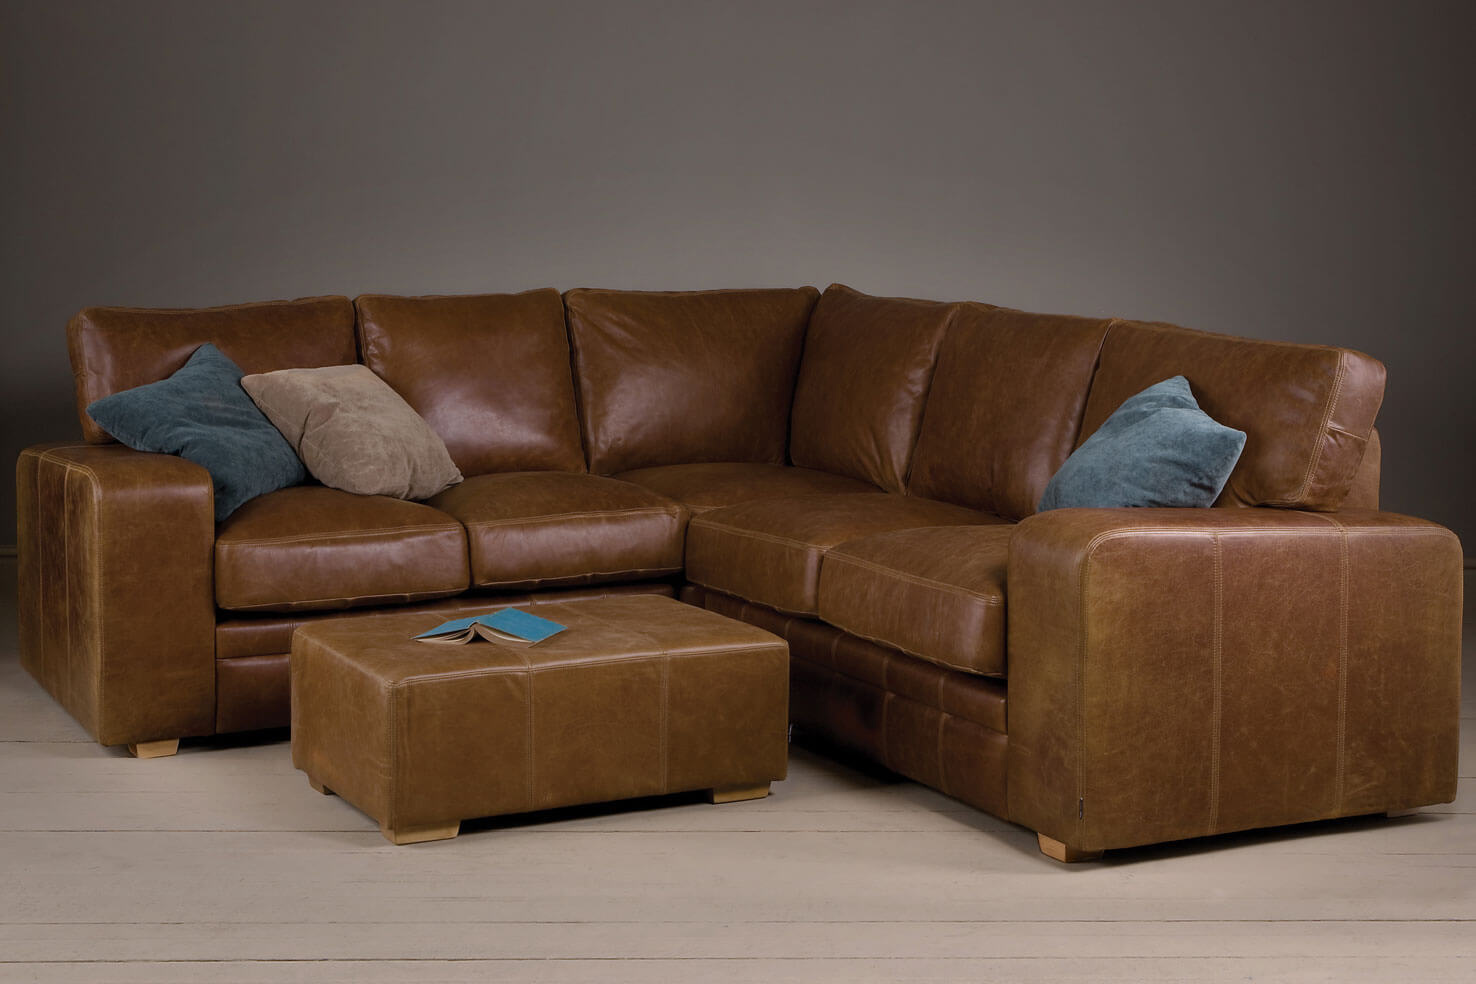 Broad Arm Leather Corner Sofa with a footstool